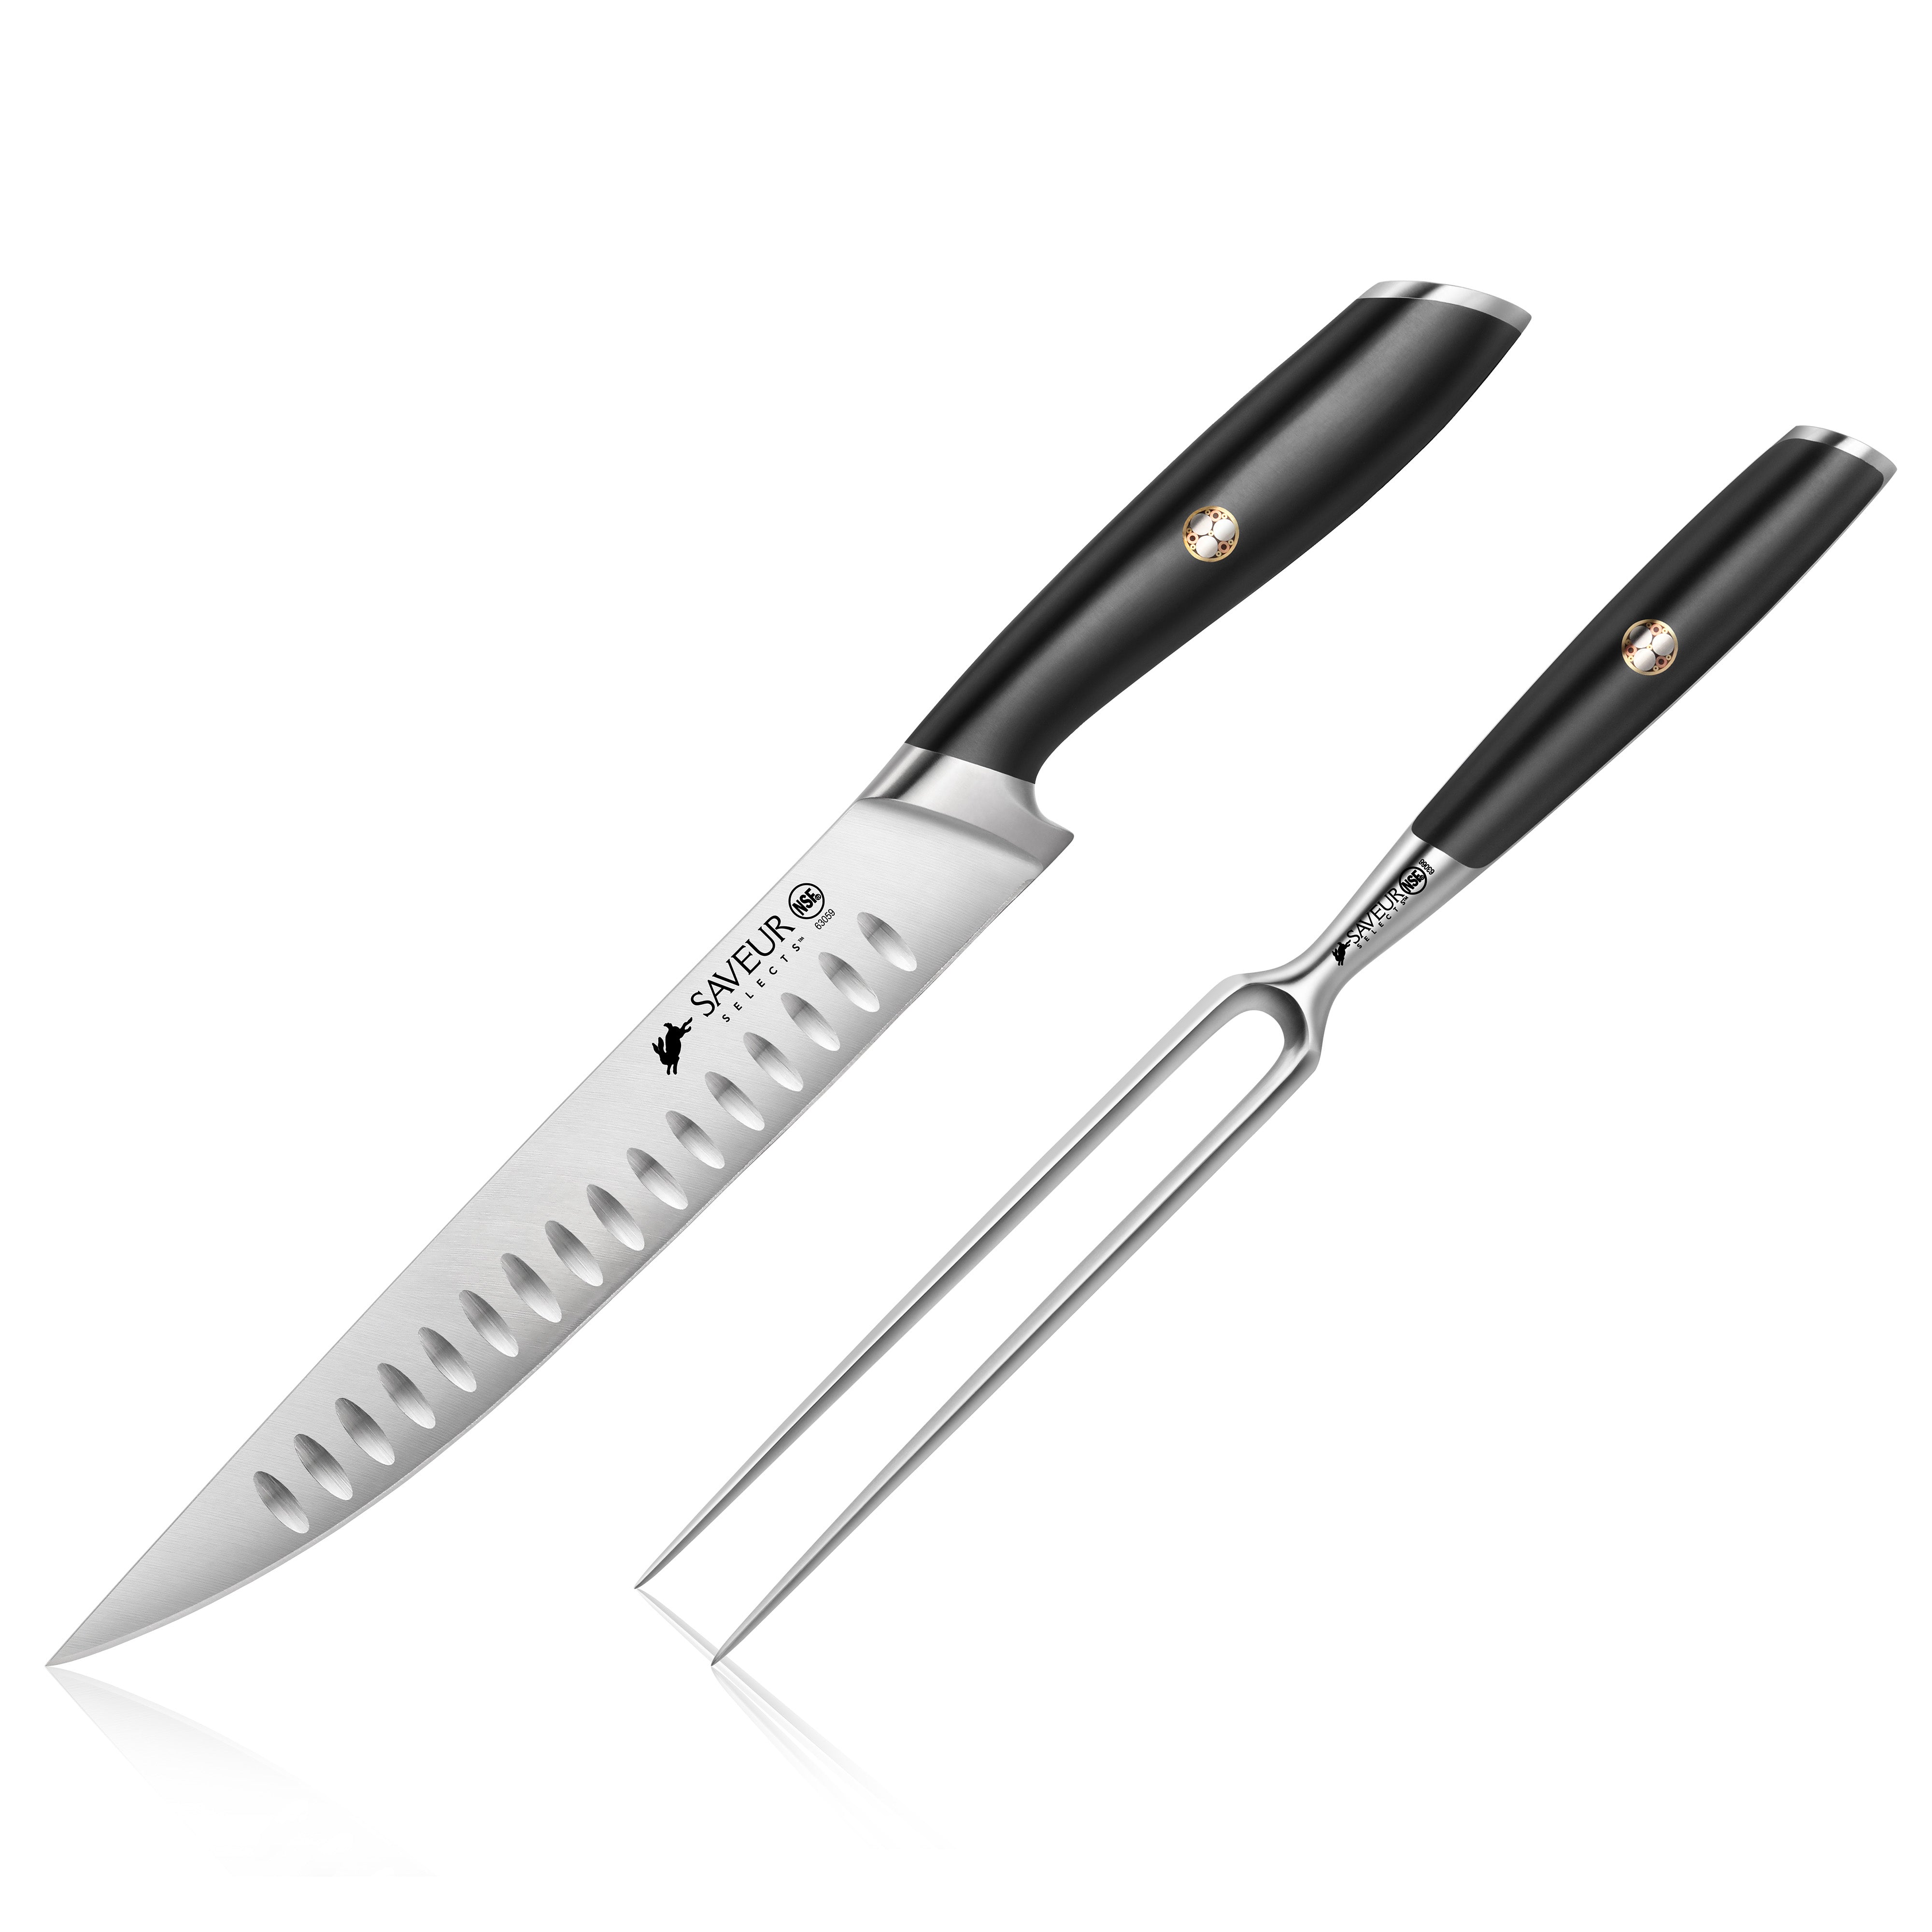 Preferred 2 Piece Stainless Steel Carving Set